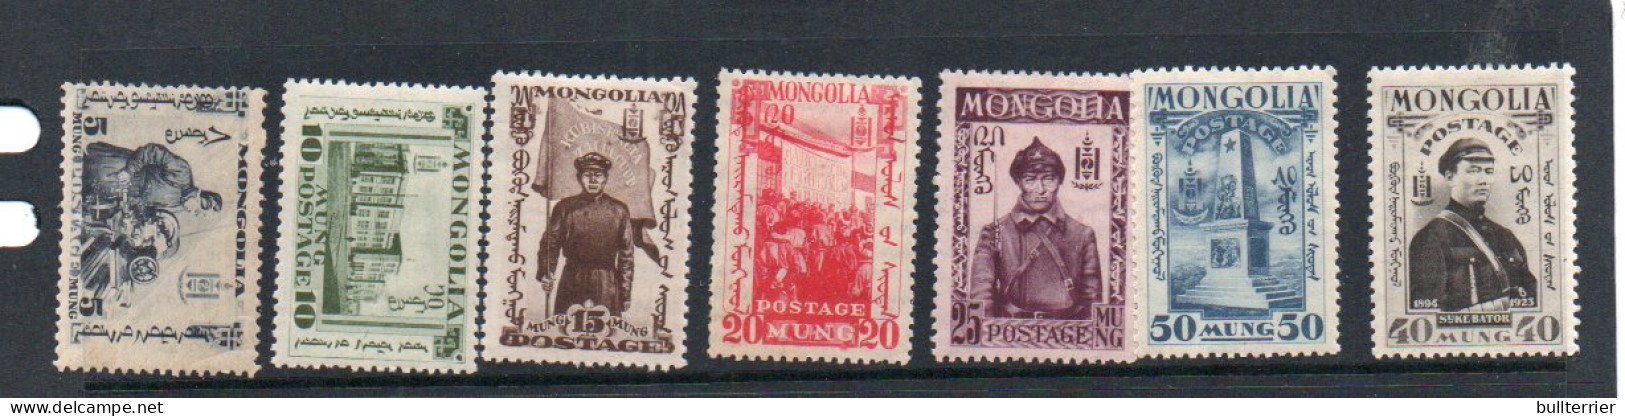 MONGOLIA - 1932 -  5MON TO 50MON MINT HINGED - VERY FINE, SELDOM OFFERED SET ,SG £22 - Mongolei